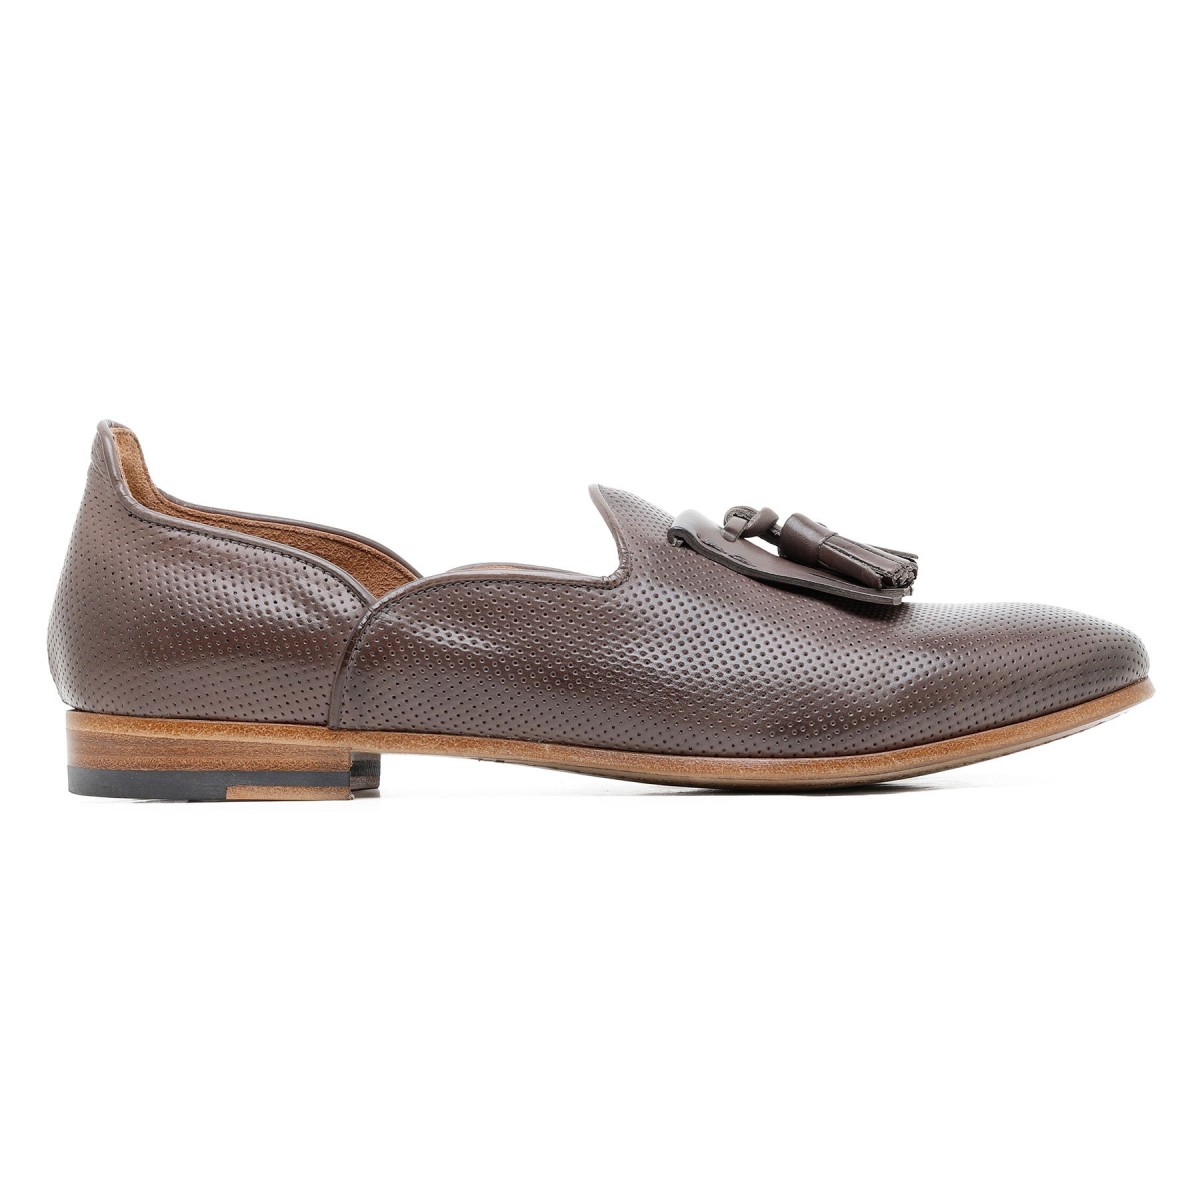 Tassels brown leather slippers